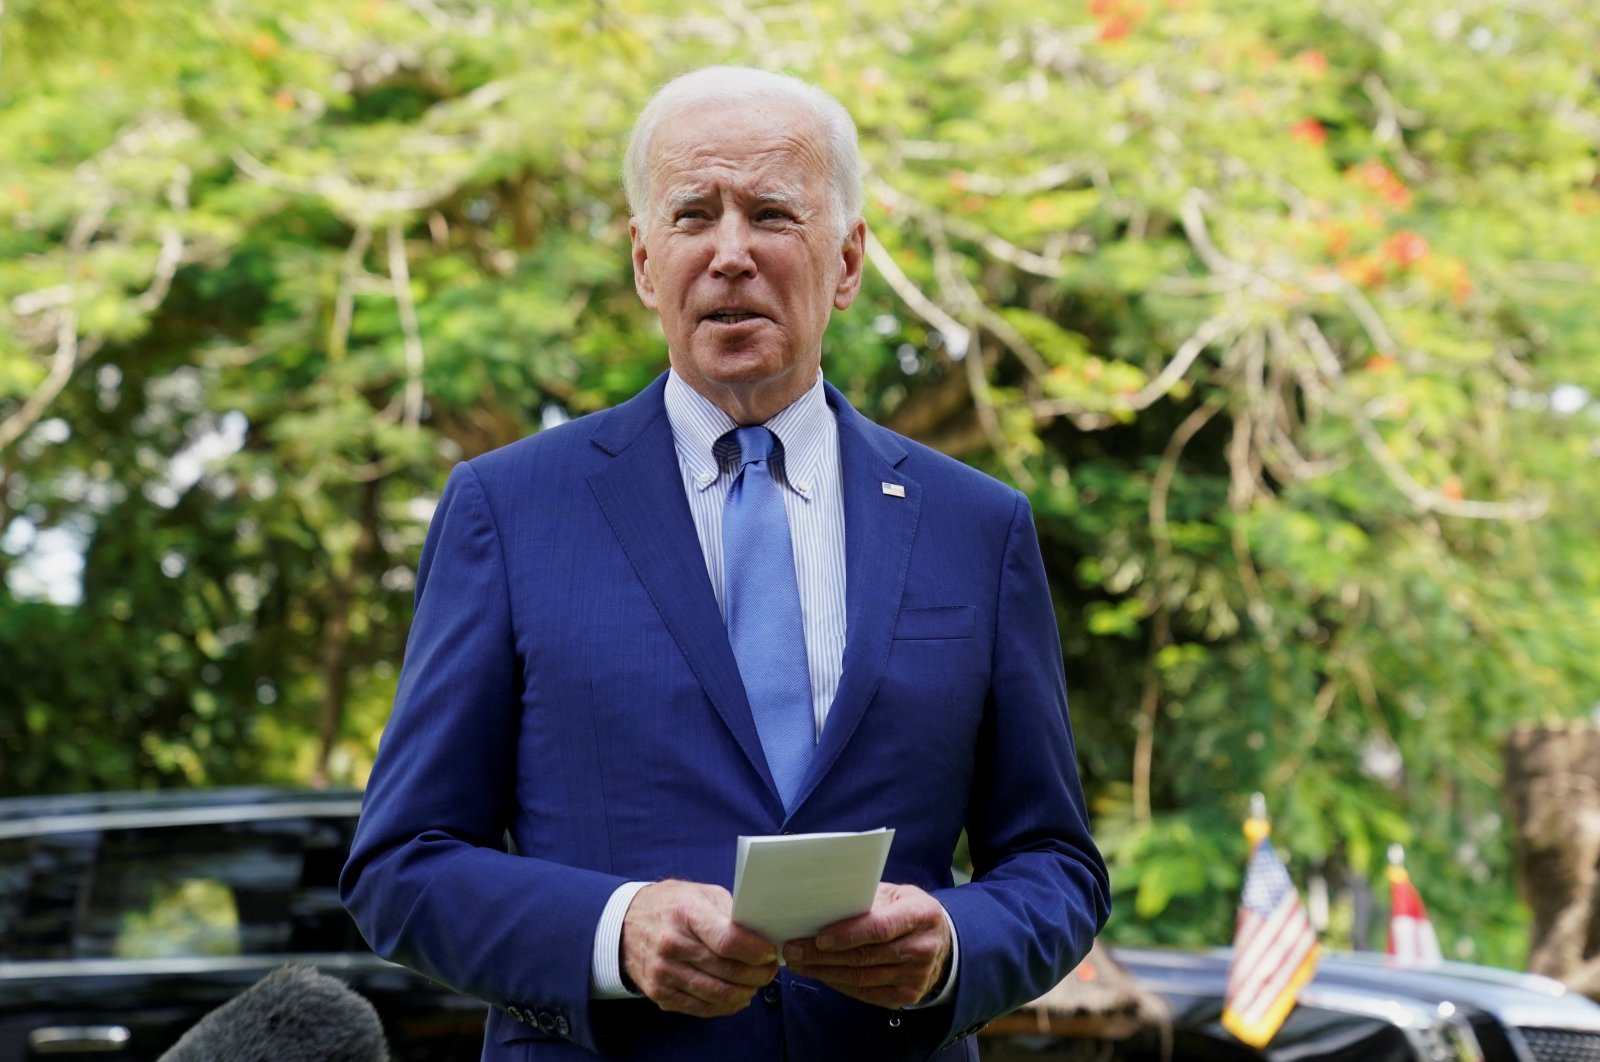 U.S. President Joe Biden speaks to the media after an alleged Russian missile blast in Poland, in Bali, Indonesia, November 16, 2022. REUTERS/Kevin Lamarque